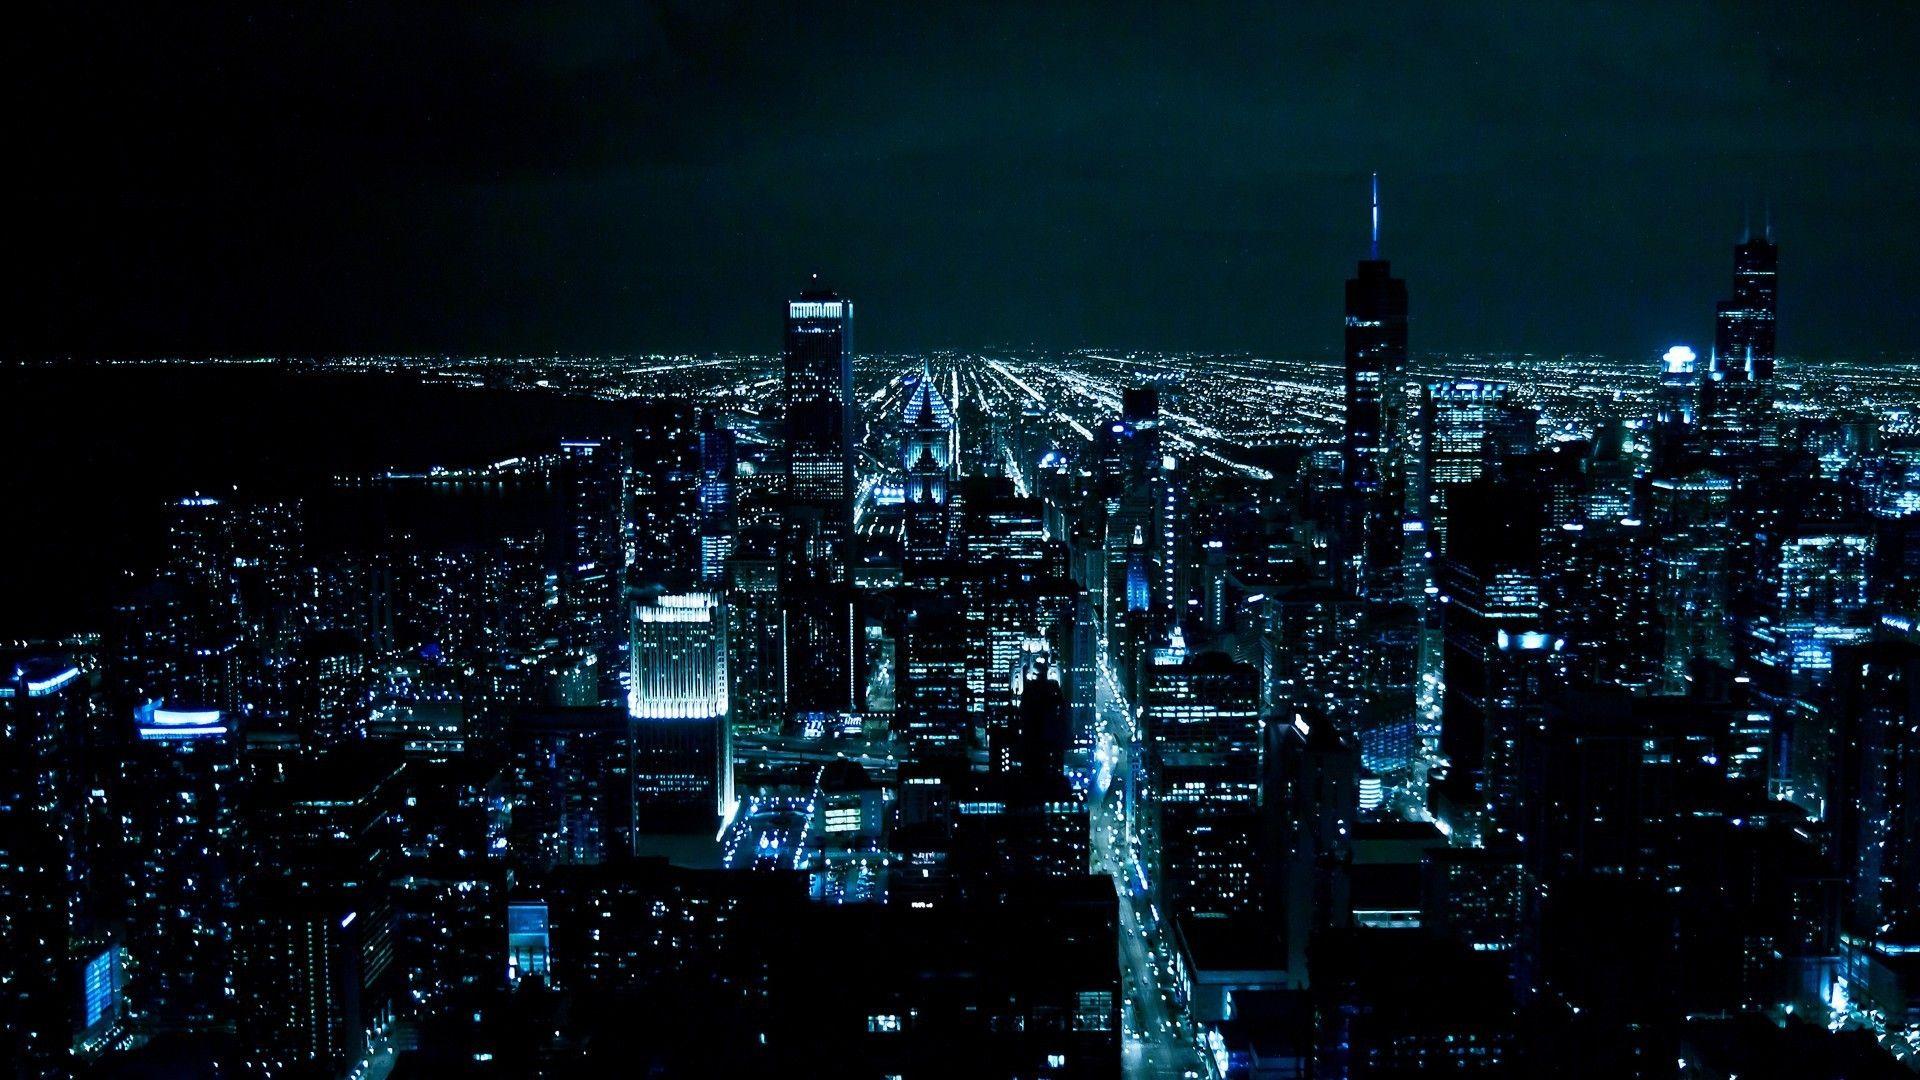 Chicago at night wallpaper. PC